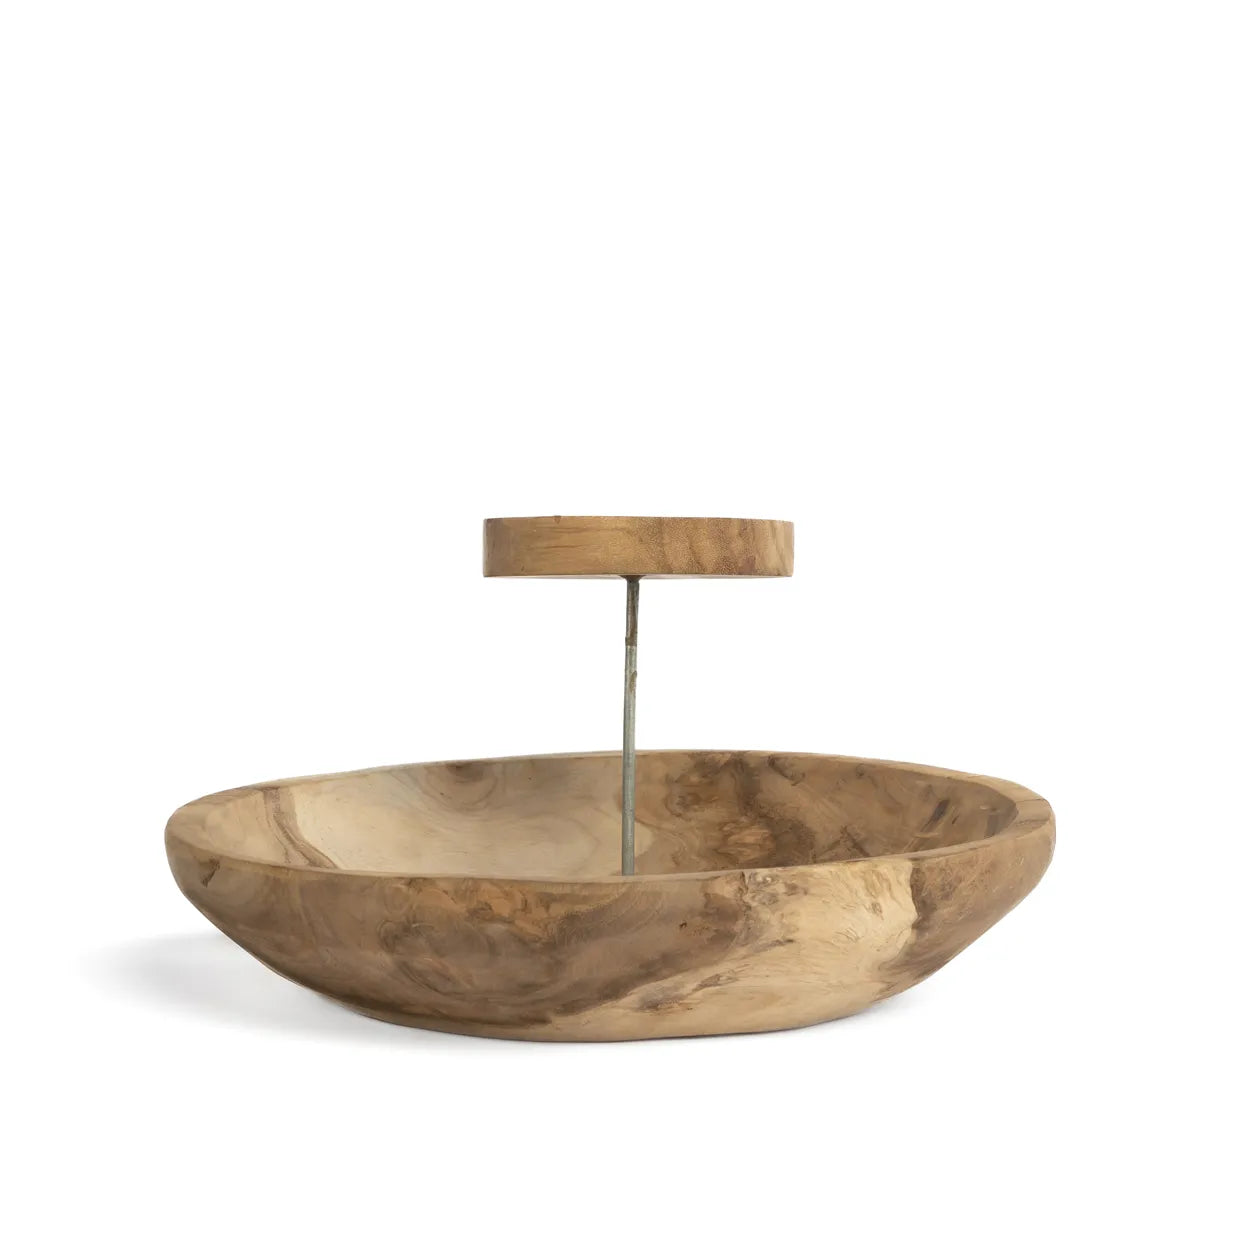 Miravet River Candle Plate - Teak Wooden Candle Plate